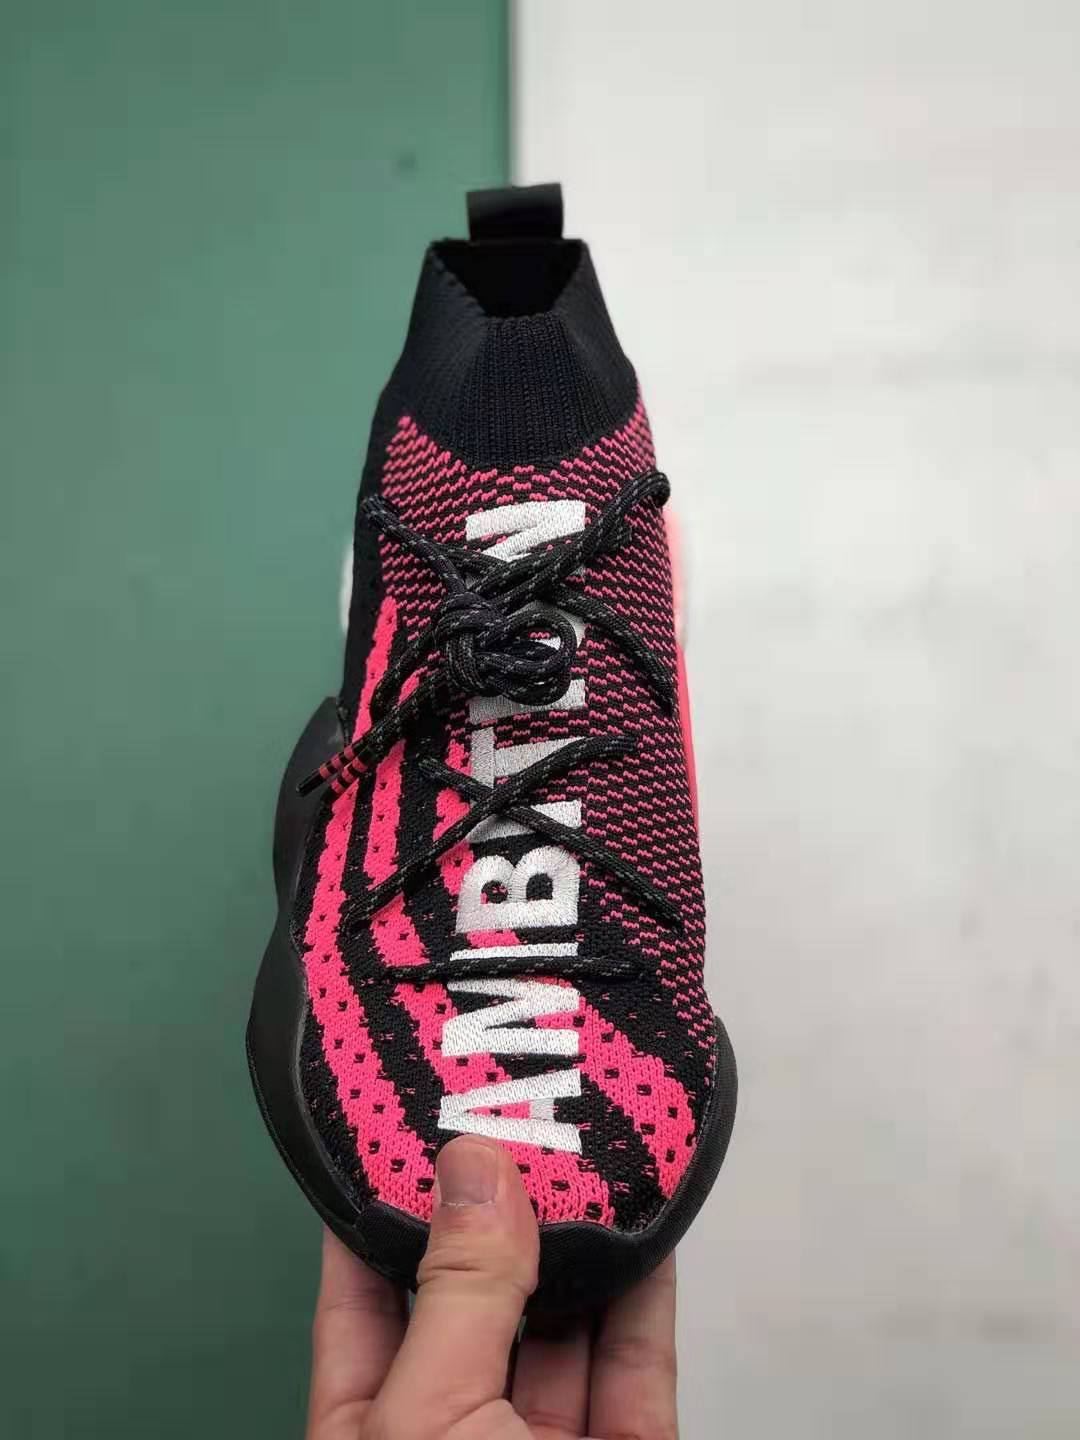 Adidas Pharrell x Crazy BYW 'Ambition' G28182 - Bold and Stylish Sneakers